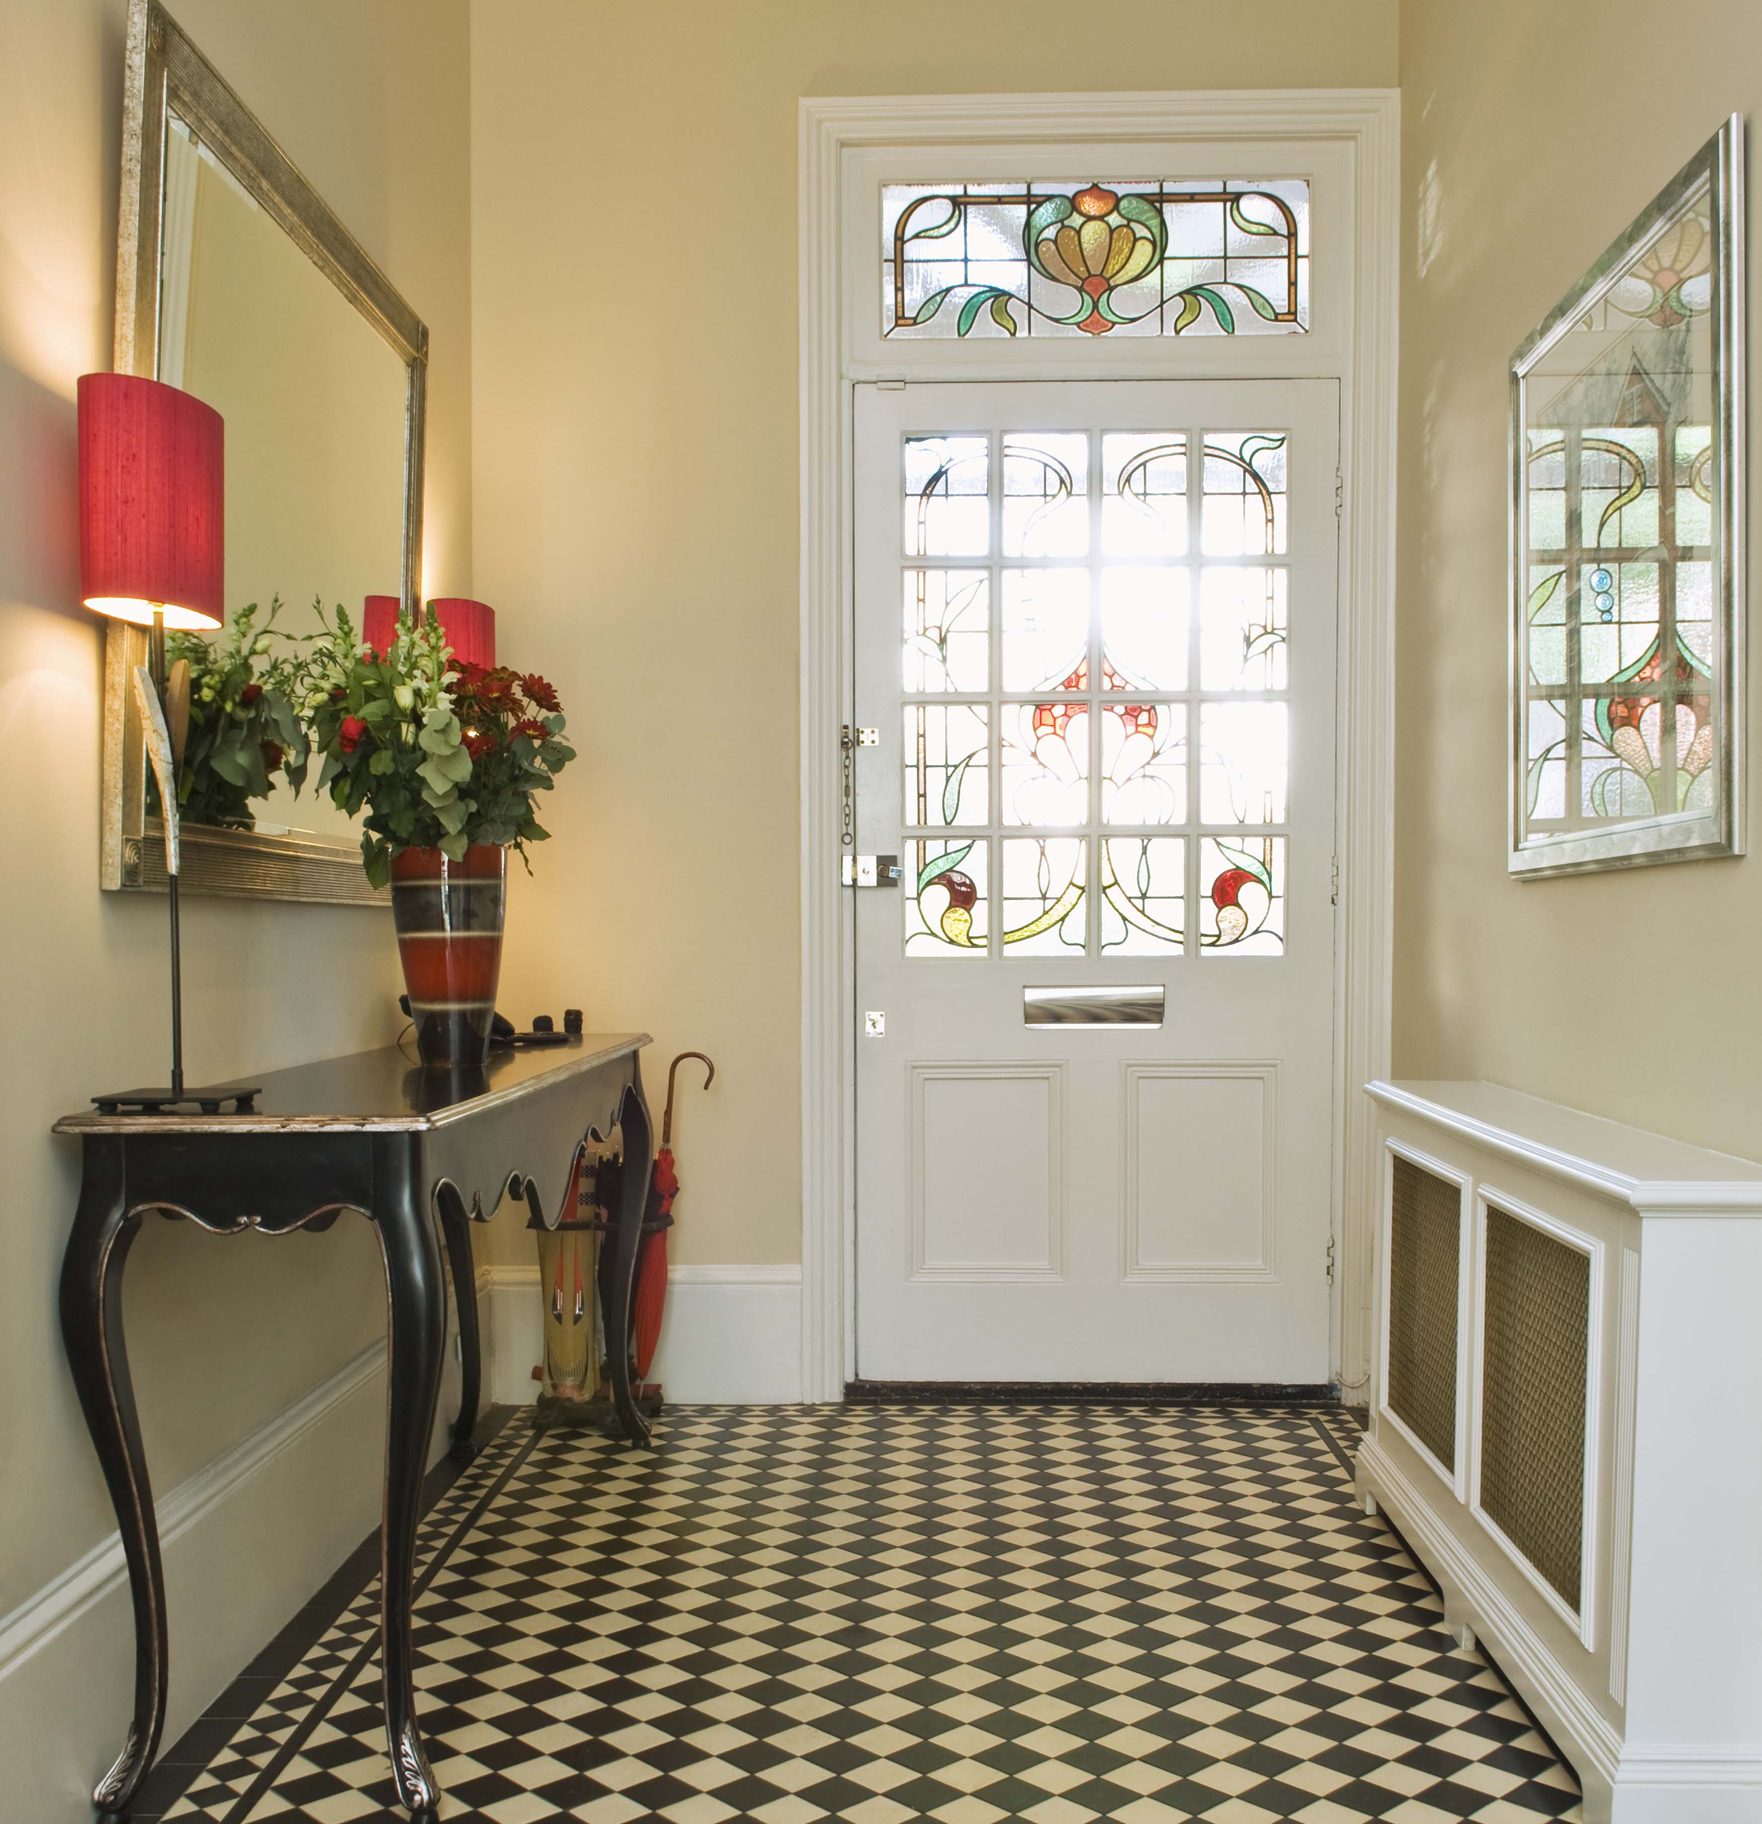 17 Really Beautiful Ideas To Decorate Your Hallway Properly